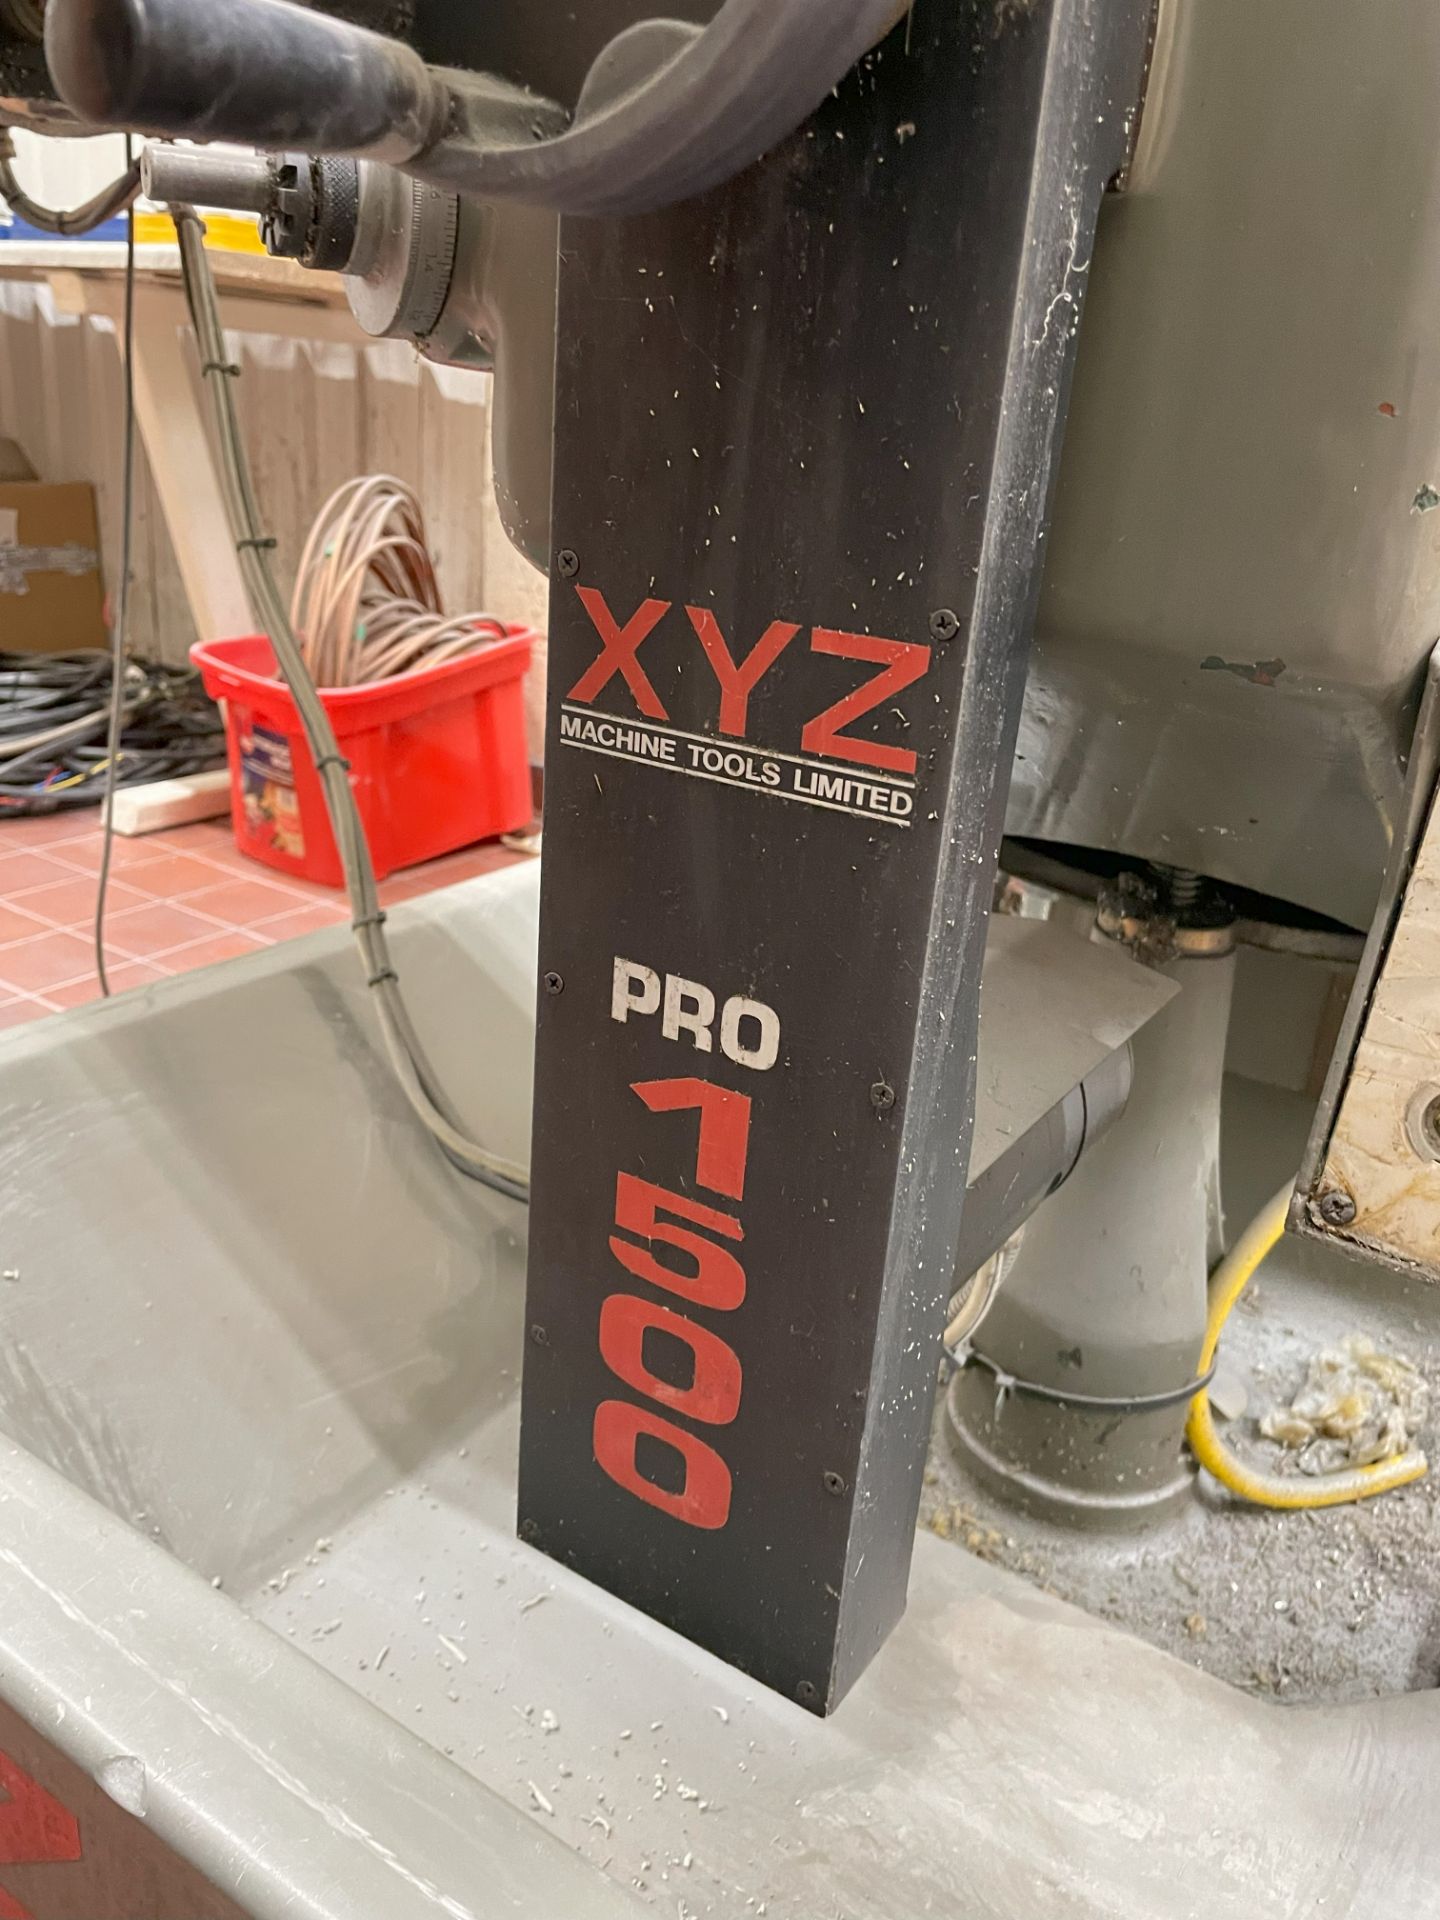 XYZ Pro CNC 1500 Milling Machine with accessories - Image 3 of 9